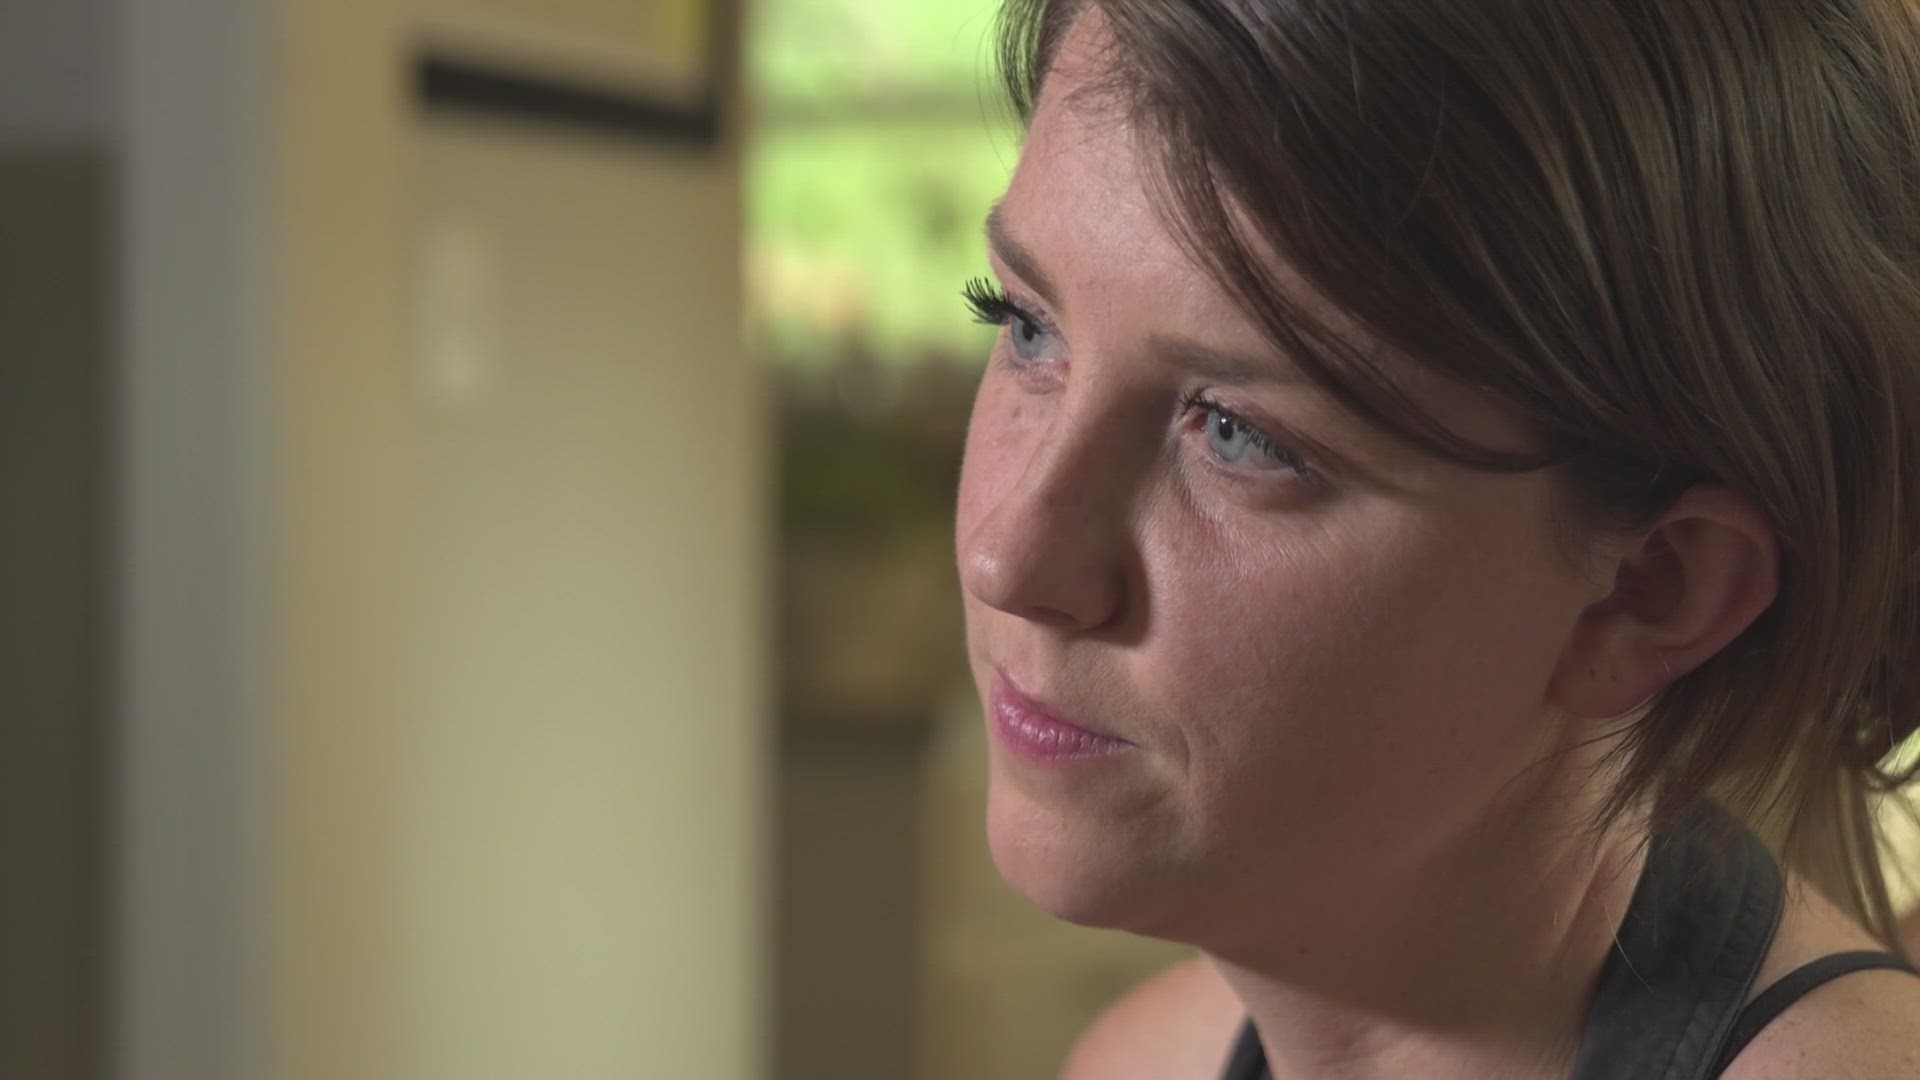 "It definitely feels like I'm living in a different world than most people," Danielle Sherrill told WFAA.